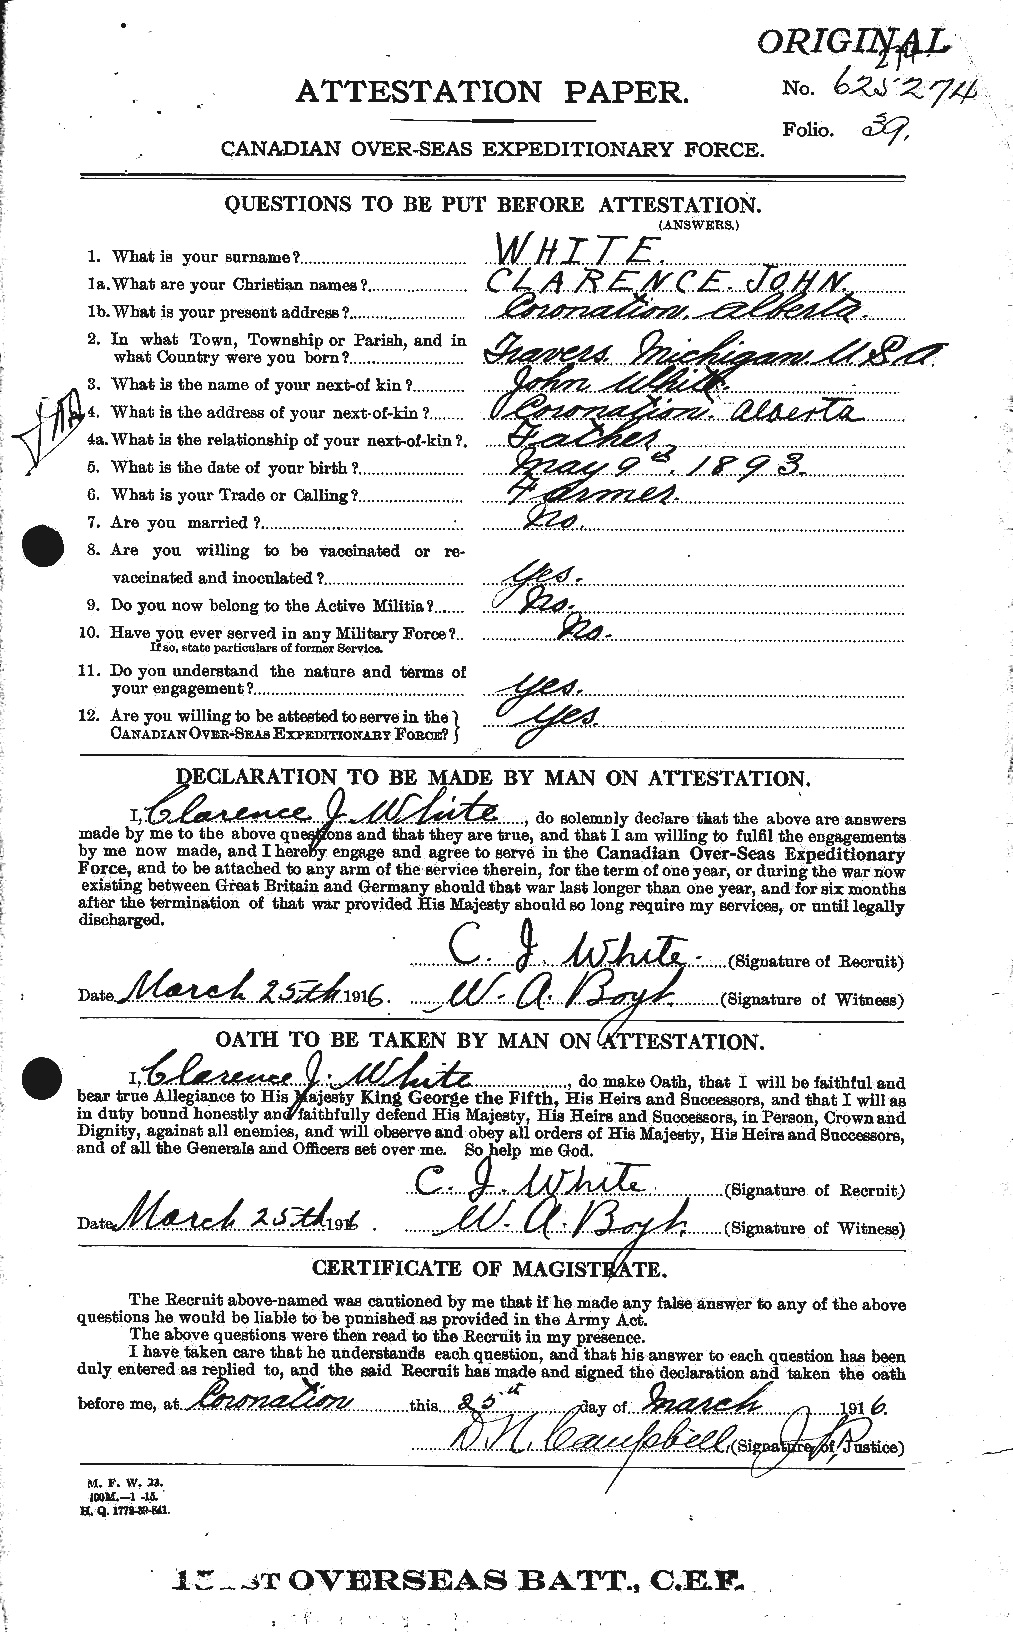 Personnel Records of the First World War - CEF 669978a